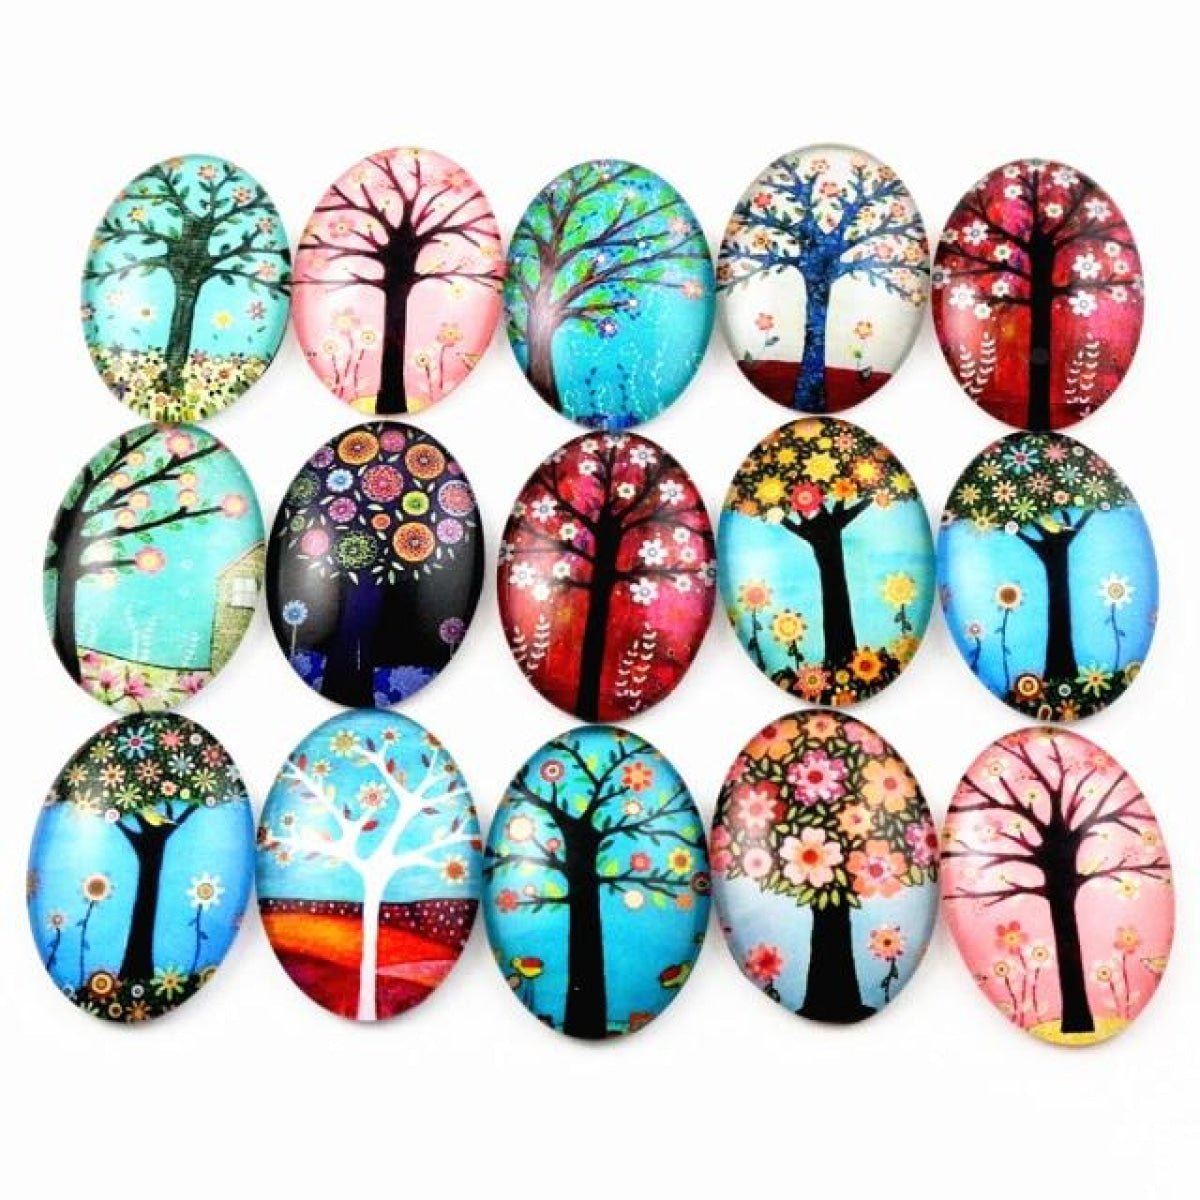 10x Glass Cabochons Flower Tree Life Handmade Oval Shape 18x25mm Jewellery Set A - Bare Branches - - Asia Sell